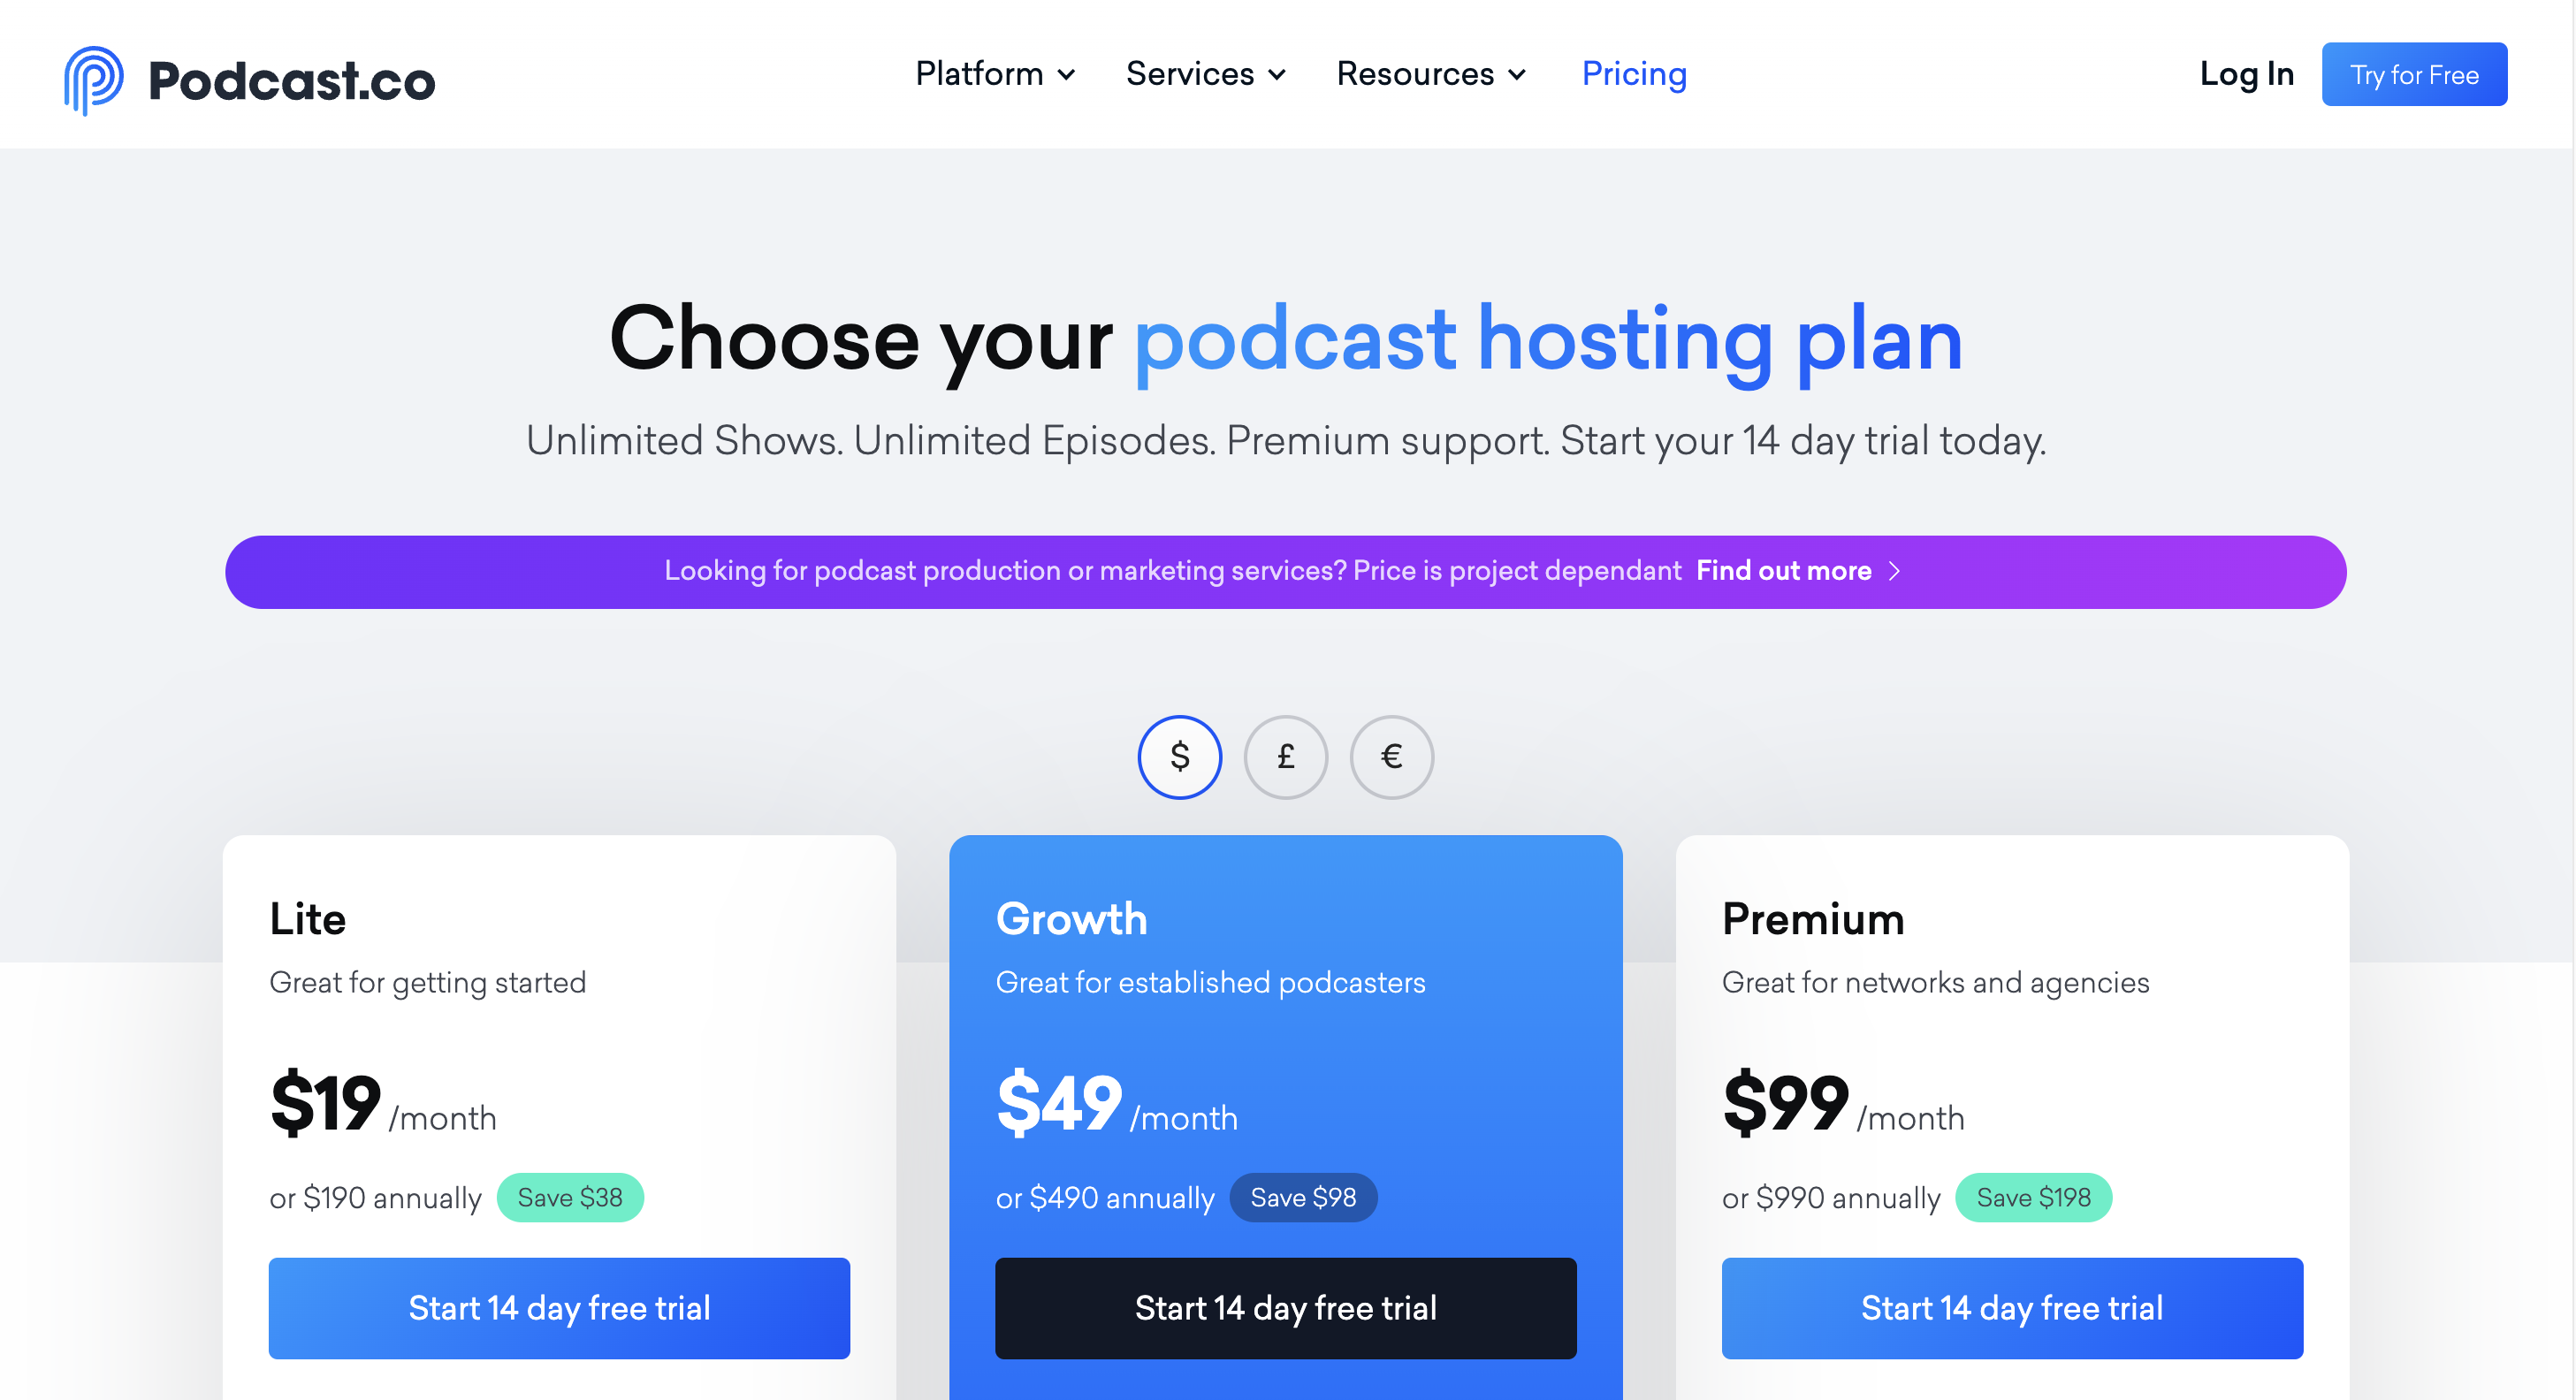 Podcast.co Pricing